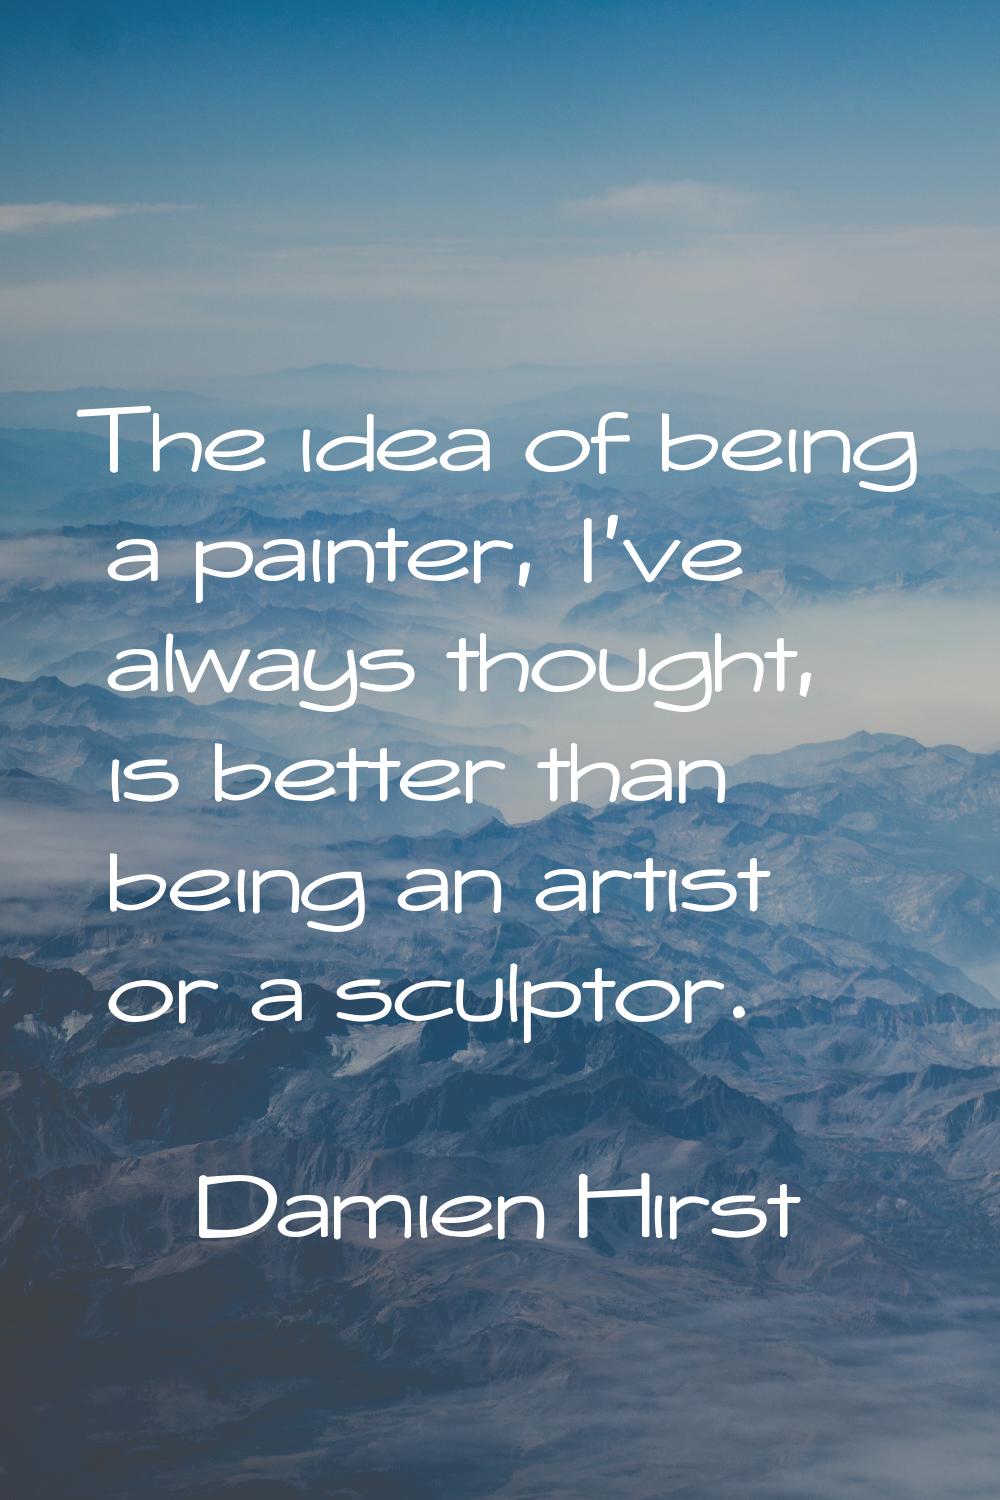 The idea of being a painter, I've always thought, is better than being an artist or a sculptor.